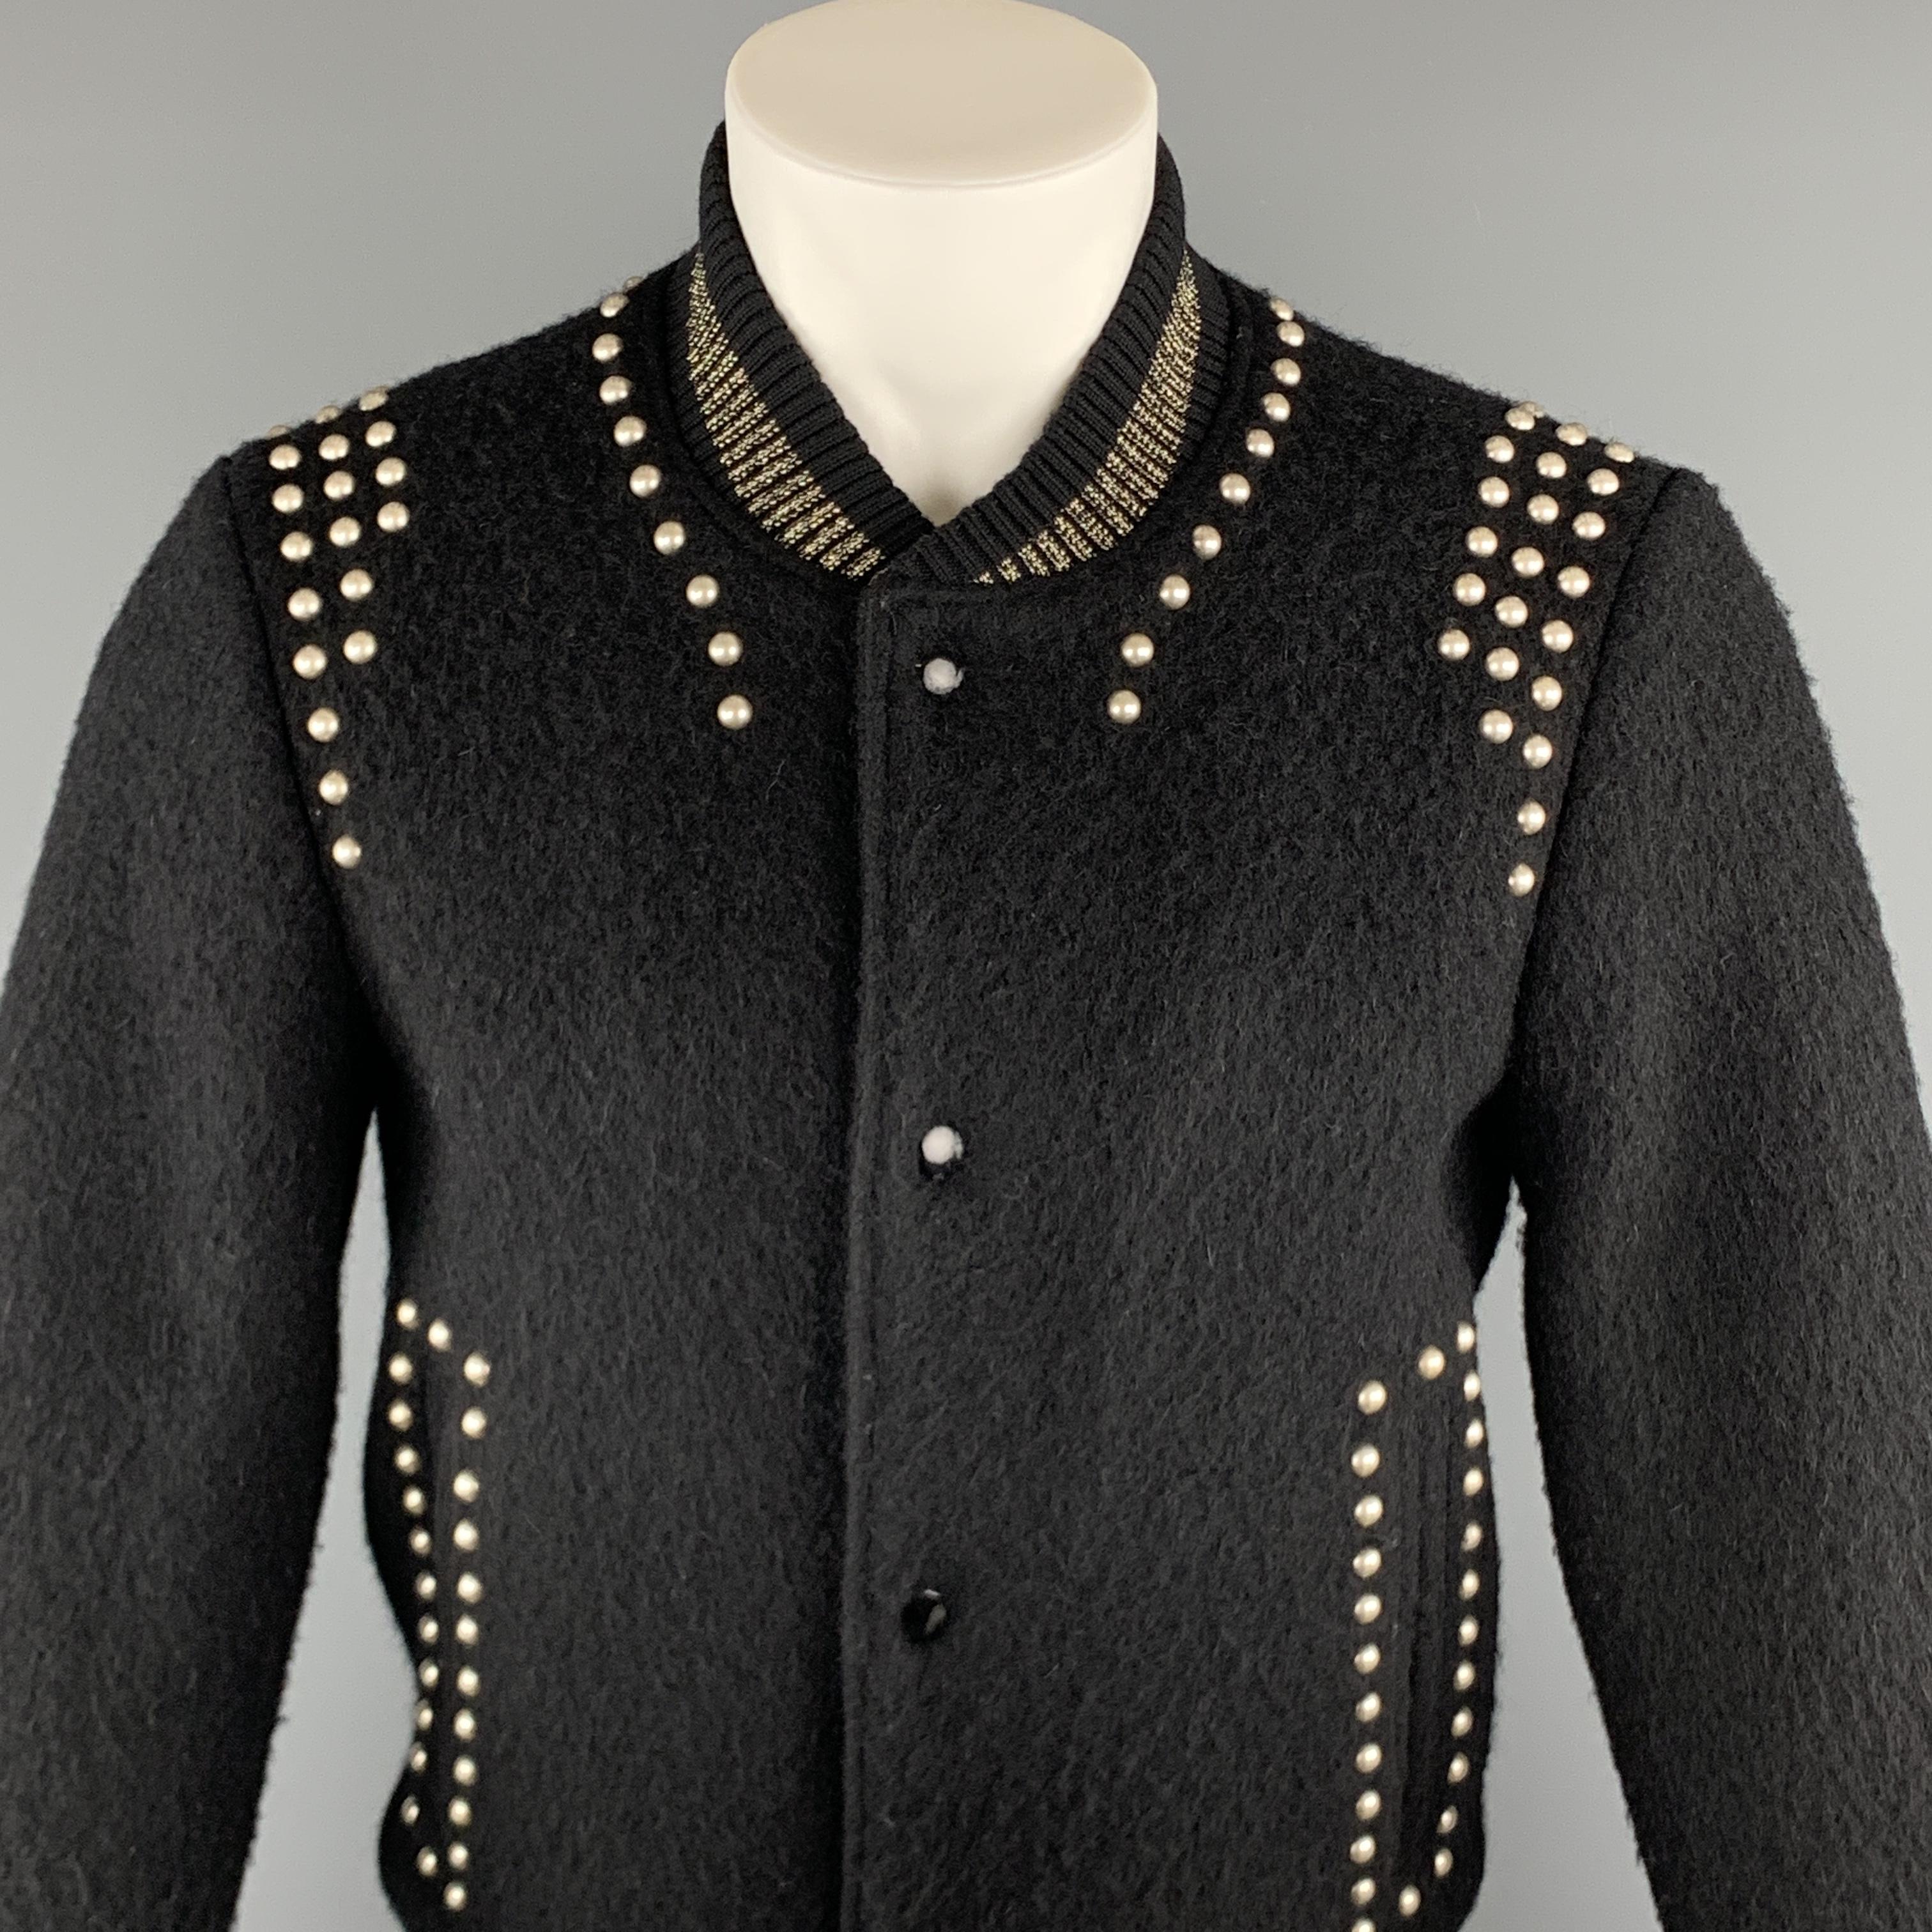 MARC JACOBS Jacket comes in a black wool featuring a bomber style, studded details, and a gold tone metallic trim. Made in Italy.

Very Good Pre-Owned Condition.
Marked: 48

Measurements:

Shoulder: 18 in. 
Chest: 38 in. 
Sleeve: 25 in. 
Length: 26